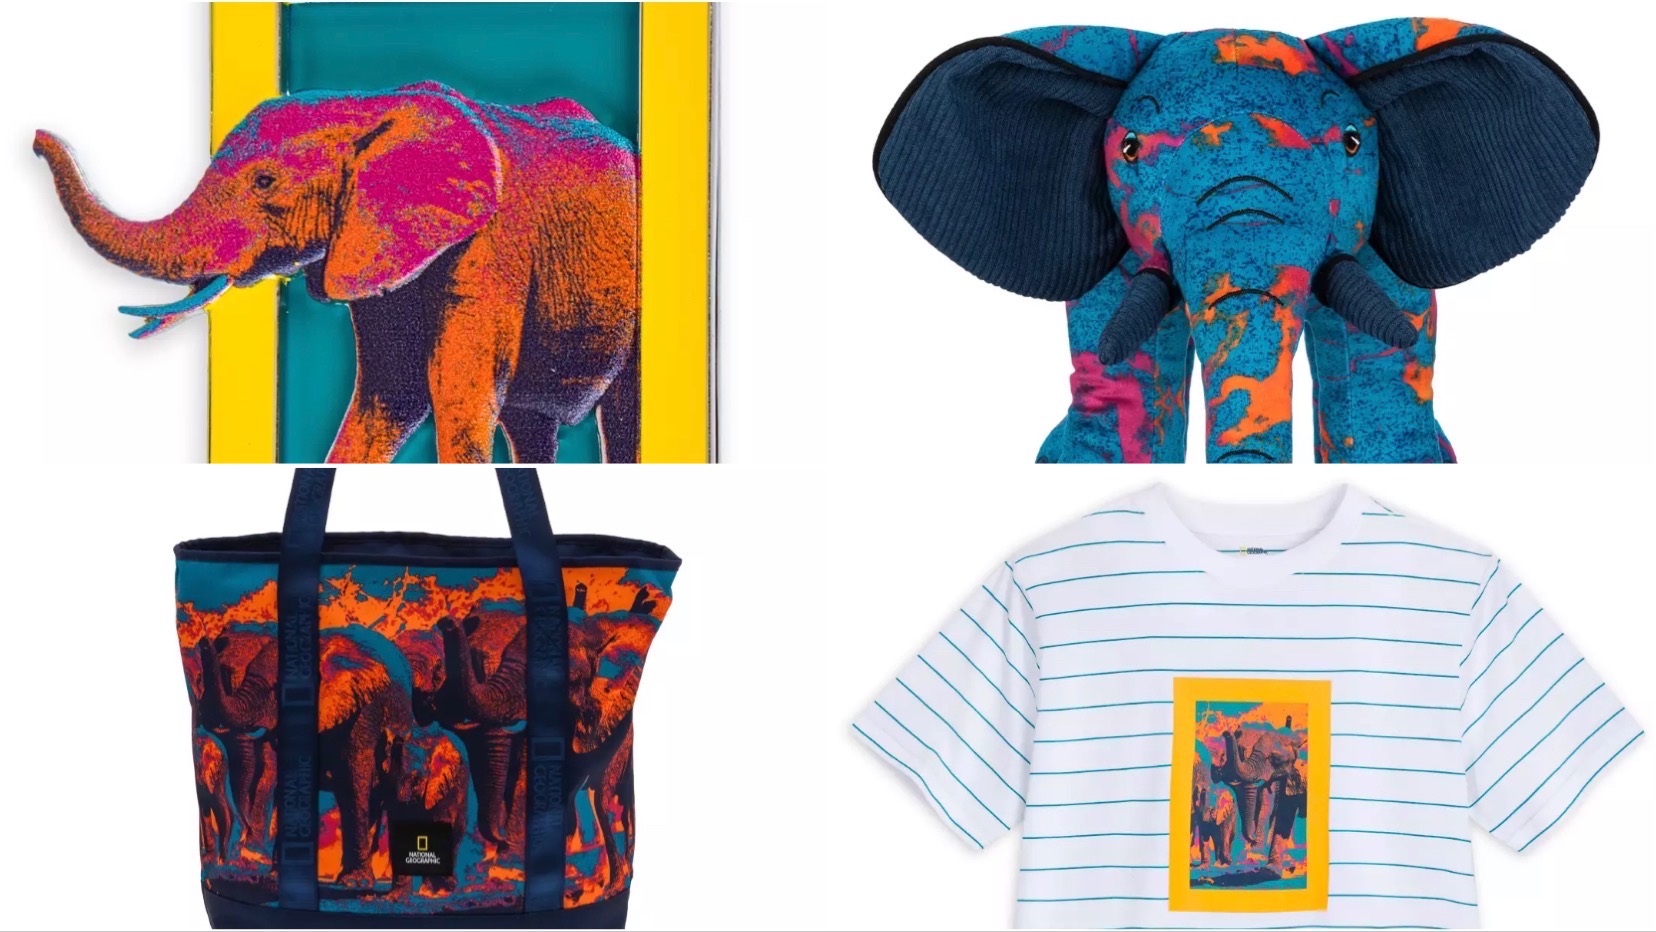 New Nat Geo Elephant Themed Products For Earth Day!